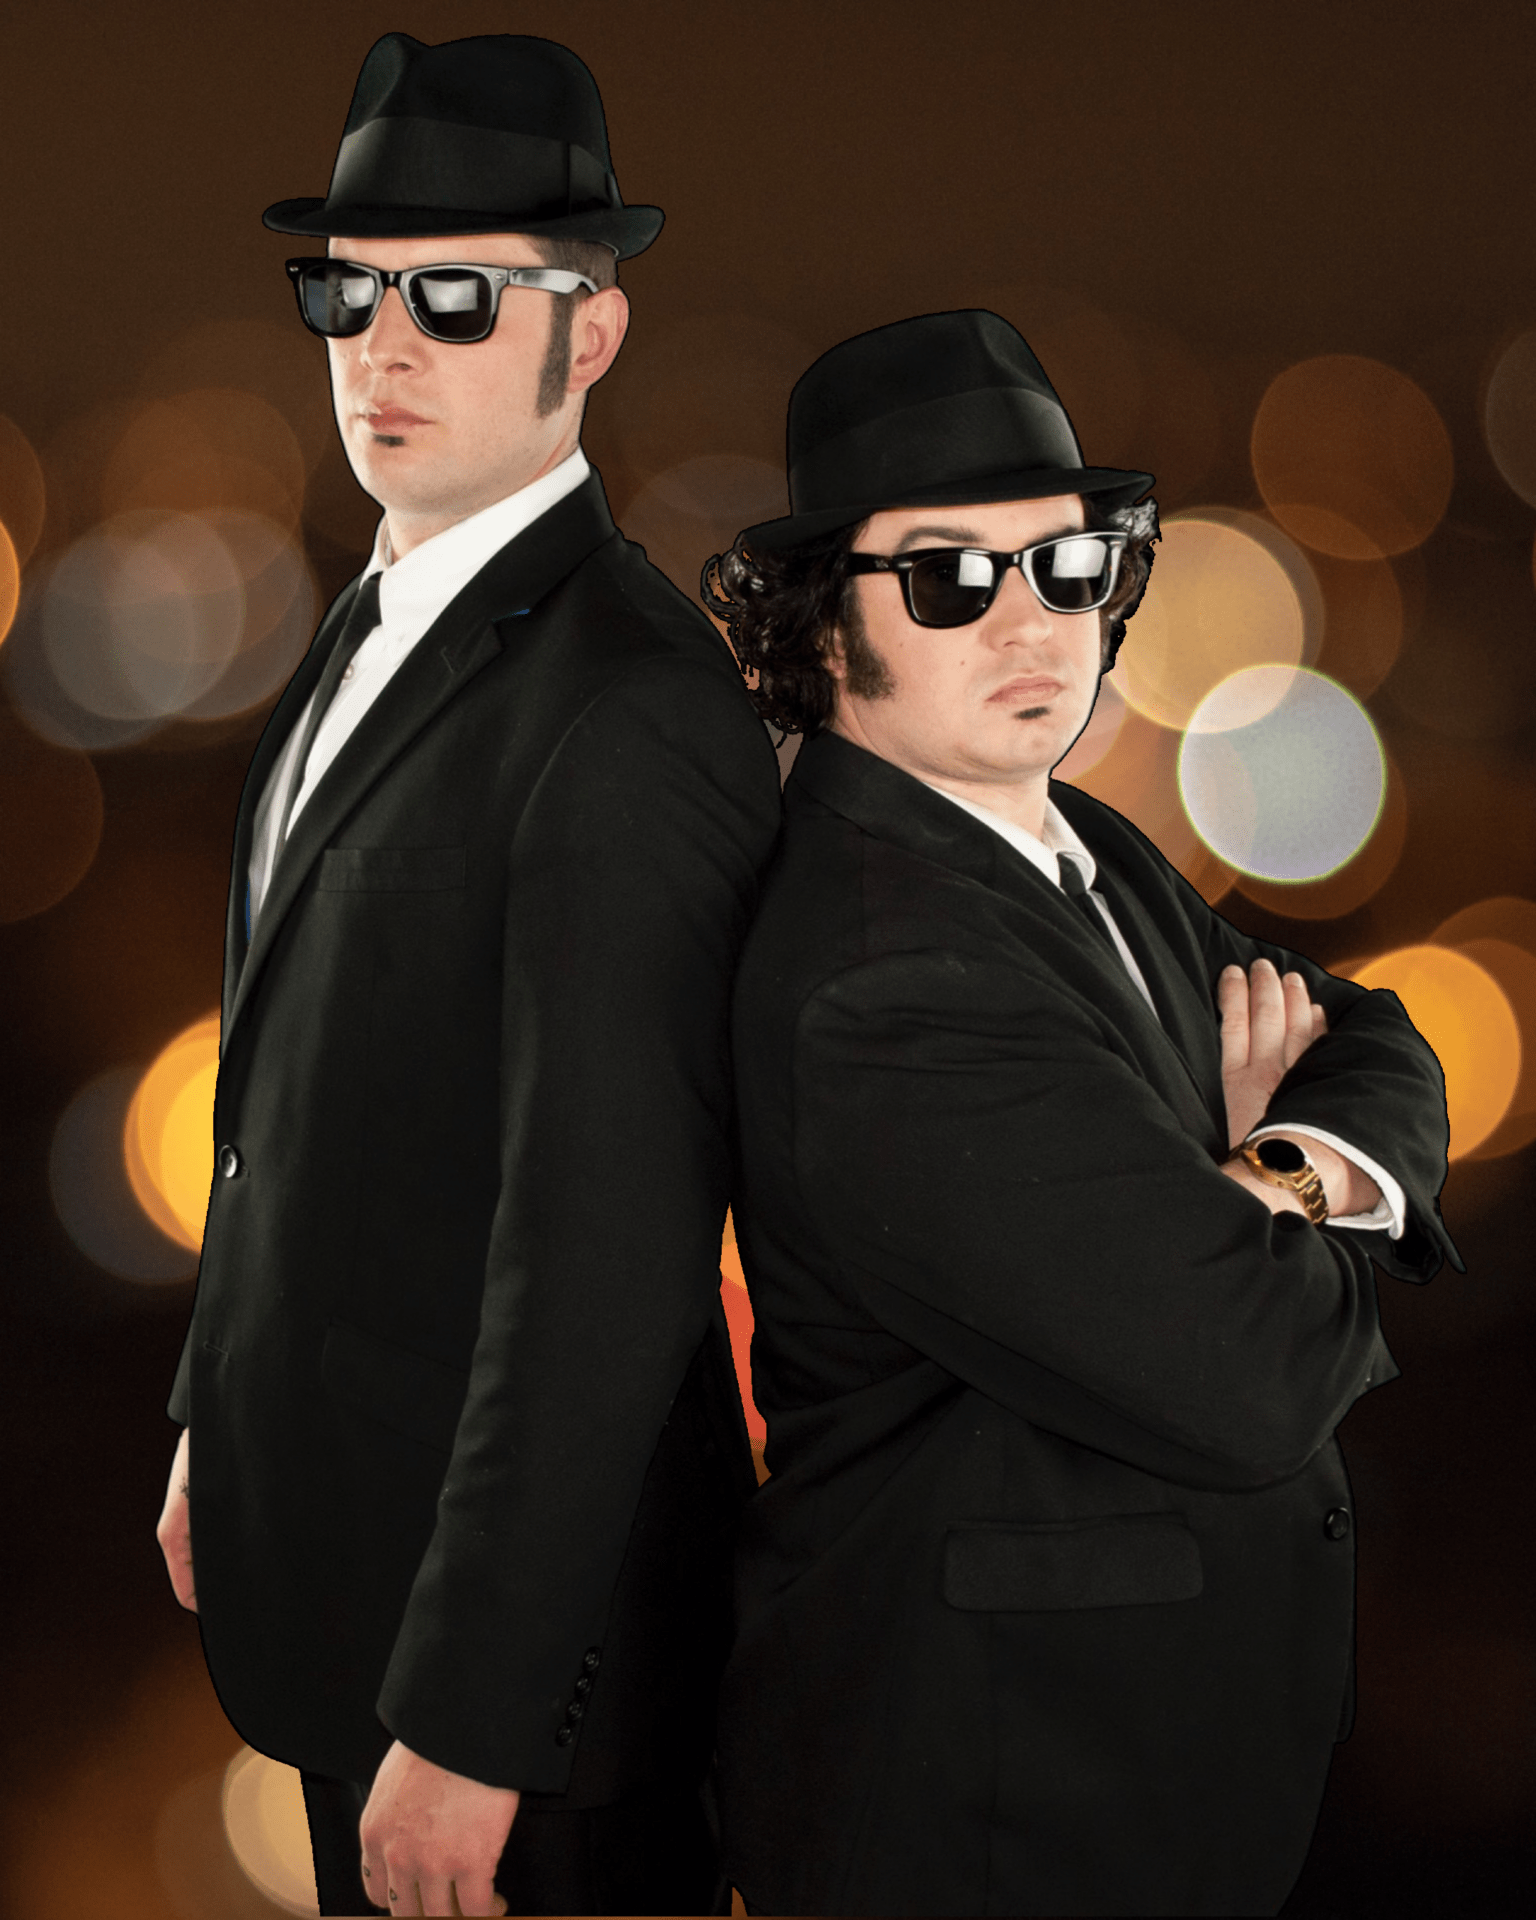 The Blues Brothers Clint Nievar and Justin Sassanella